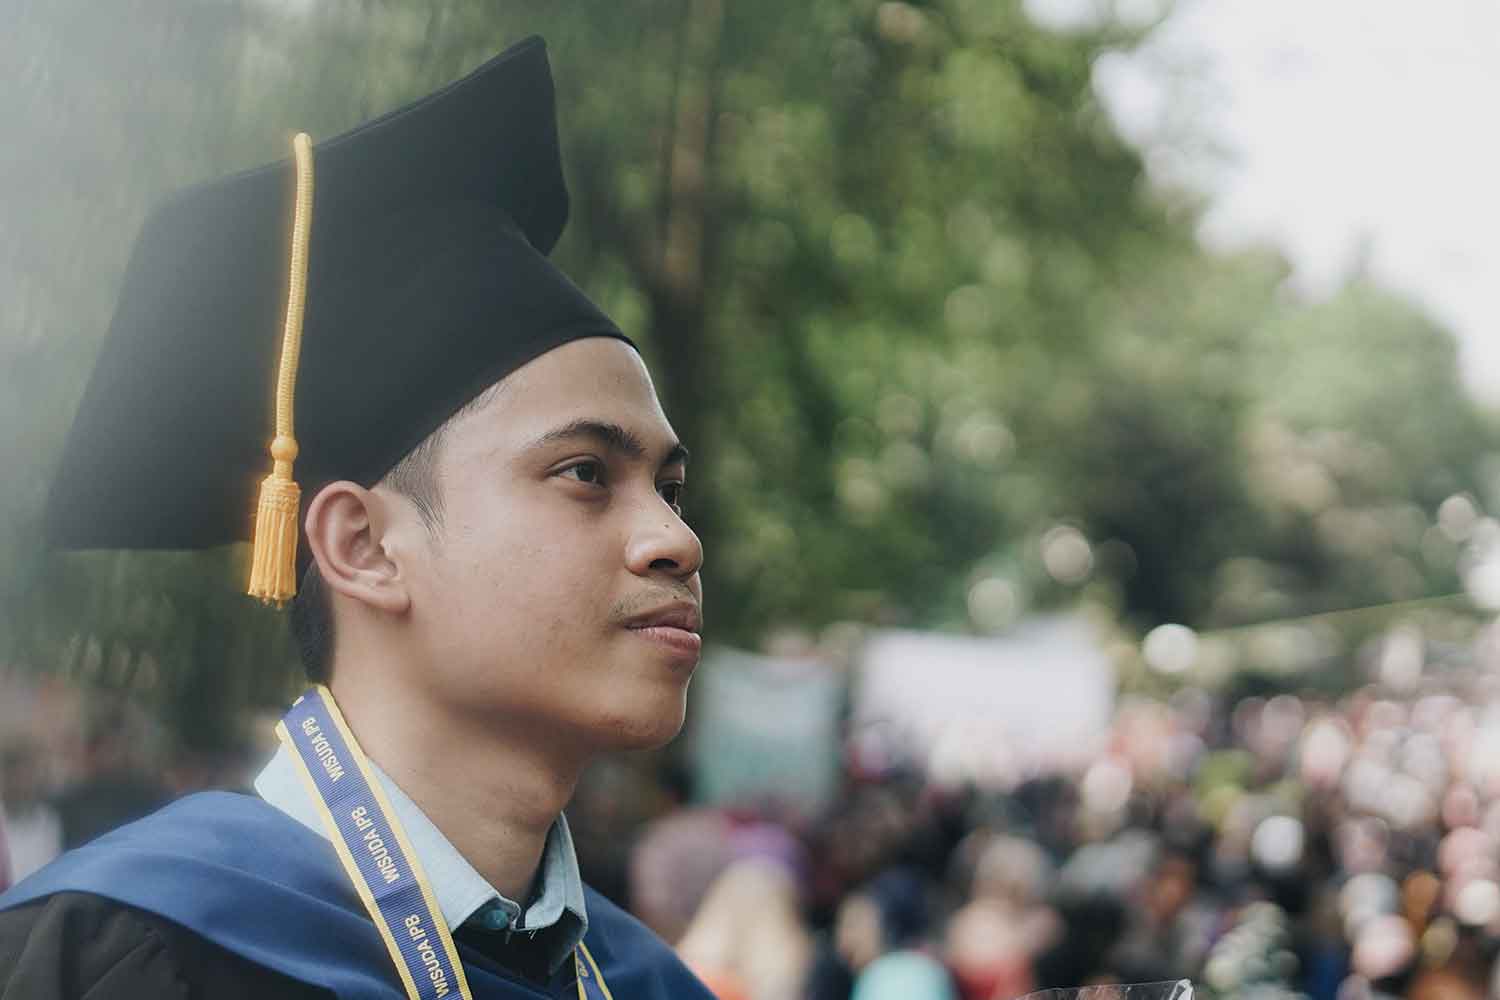 What to Wear Under Graduation Gown | Top to Bottom Tips for Graduates' Attire